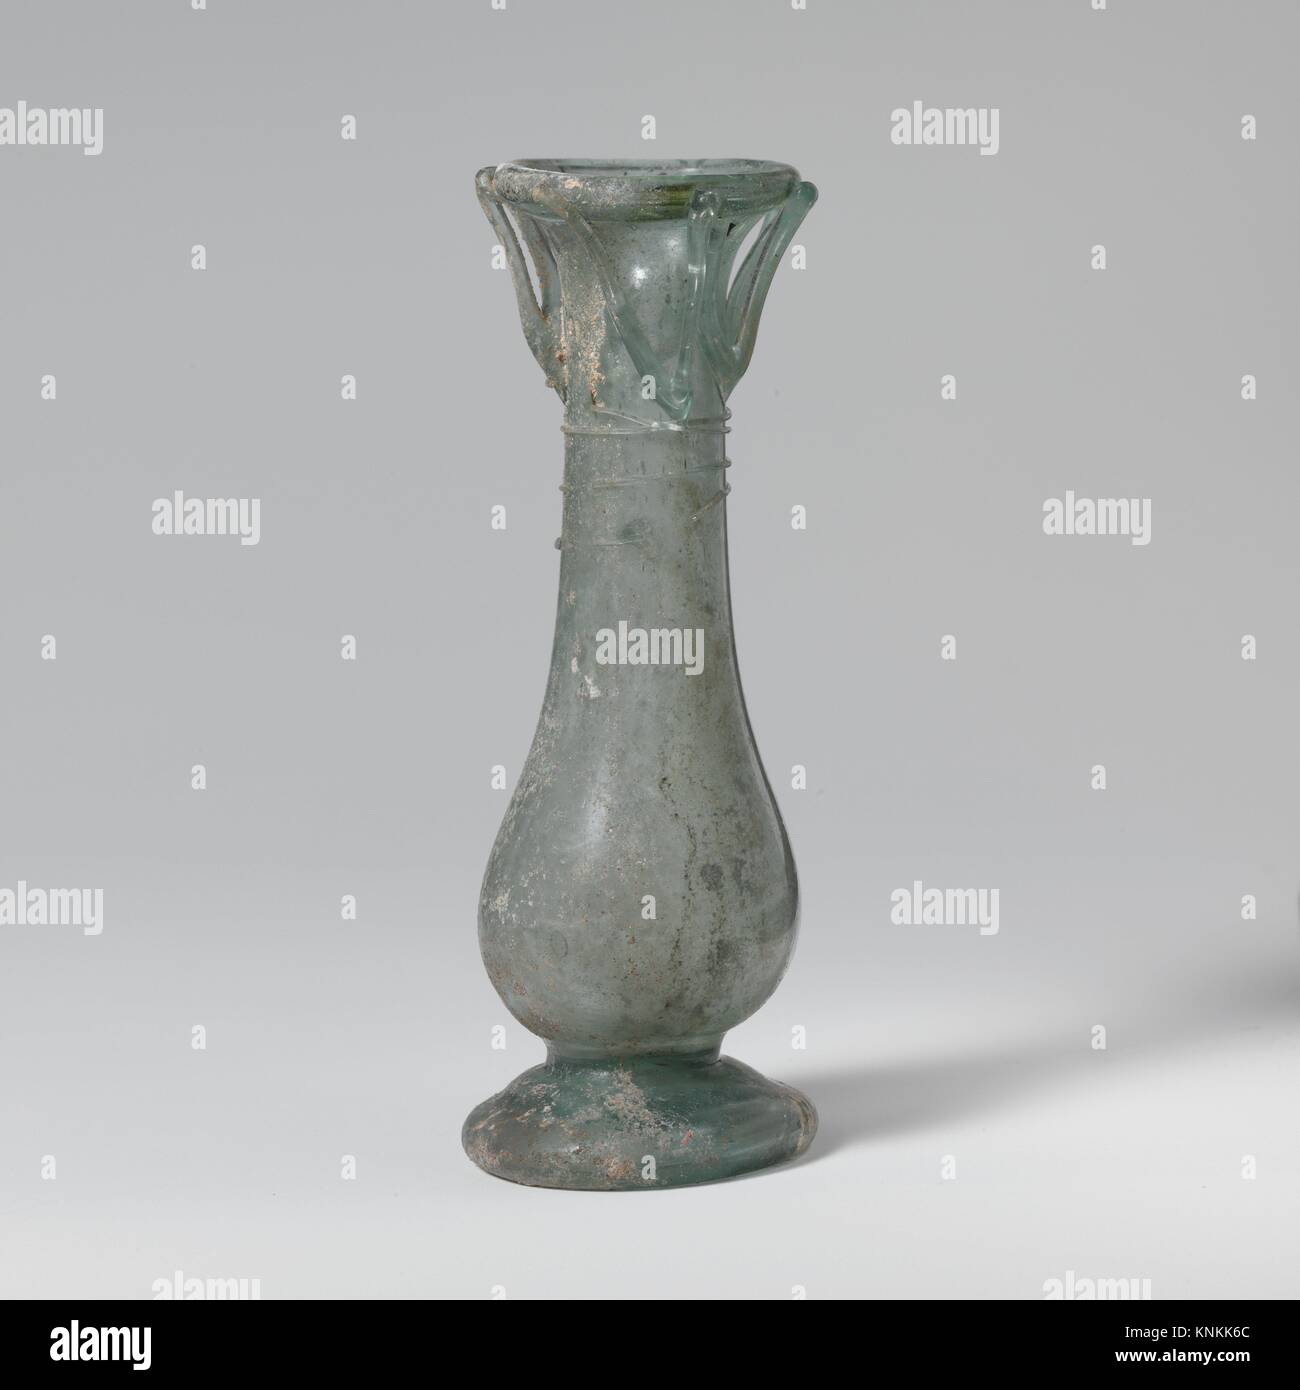 Glass Cosmetic Flask Kohl Tube Period Late Imperial Date 3rd 4th Century A D Culture